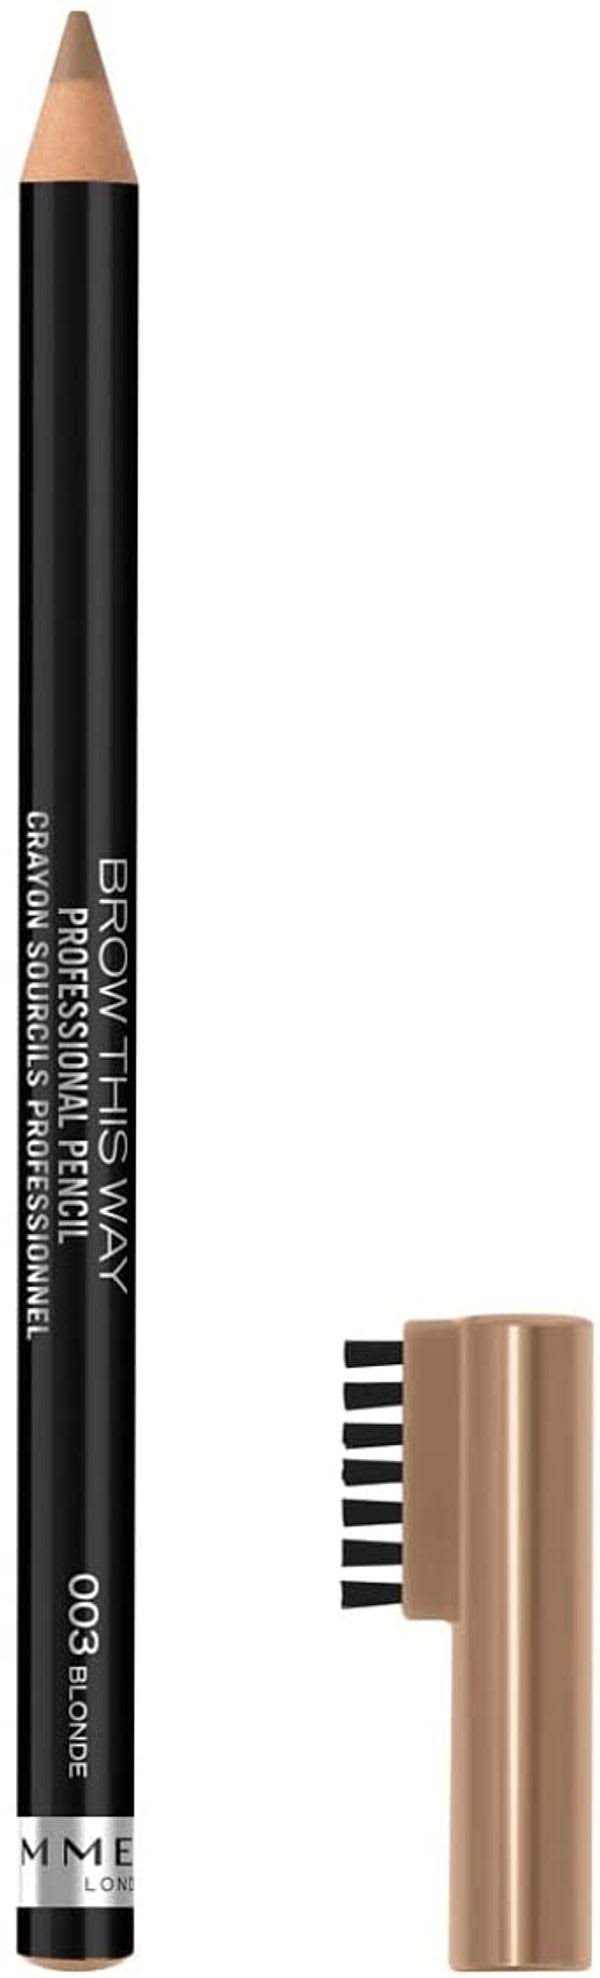 Rimmel London Brow This Way Professional Pencil #003 - Blonde